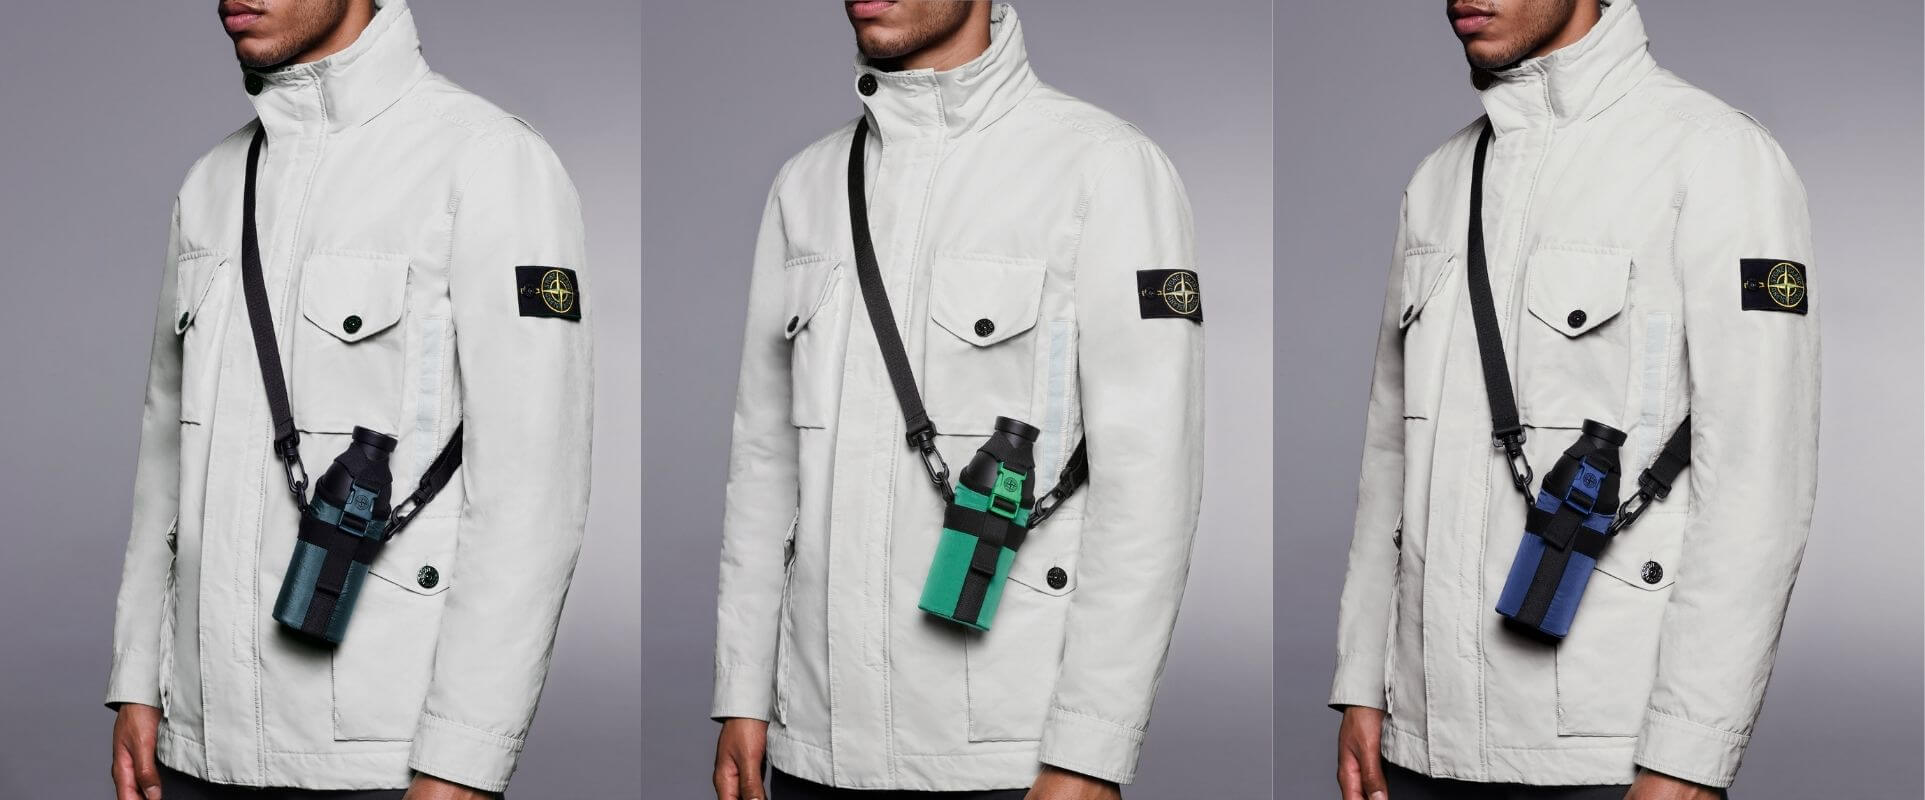 24Bottles for Stone Island: the Thermosensitive design experience